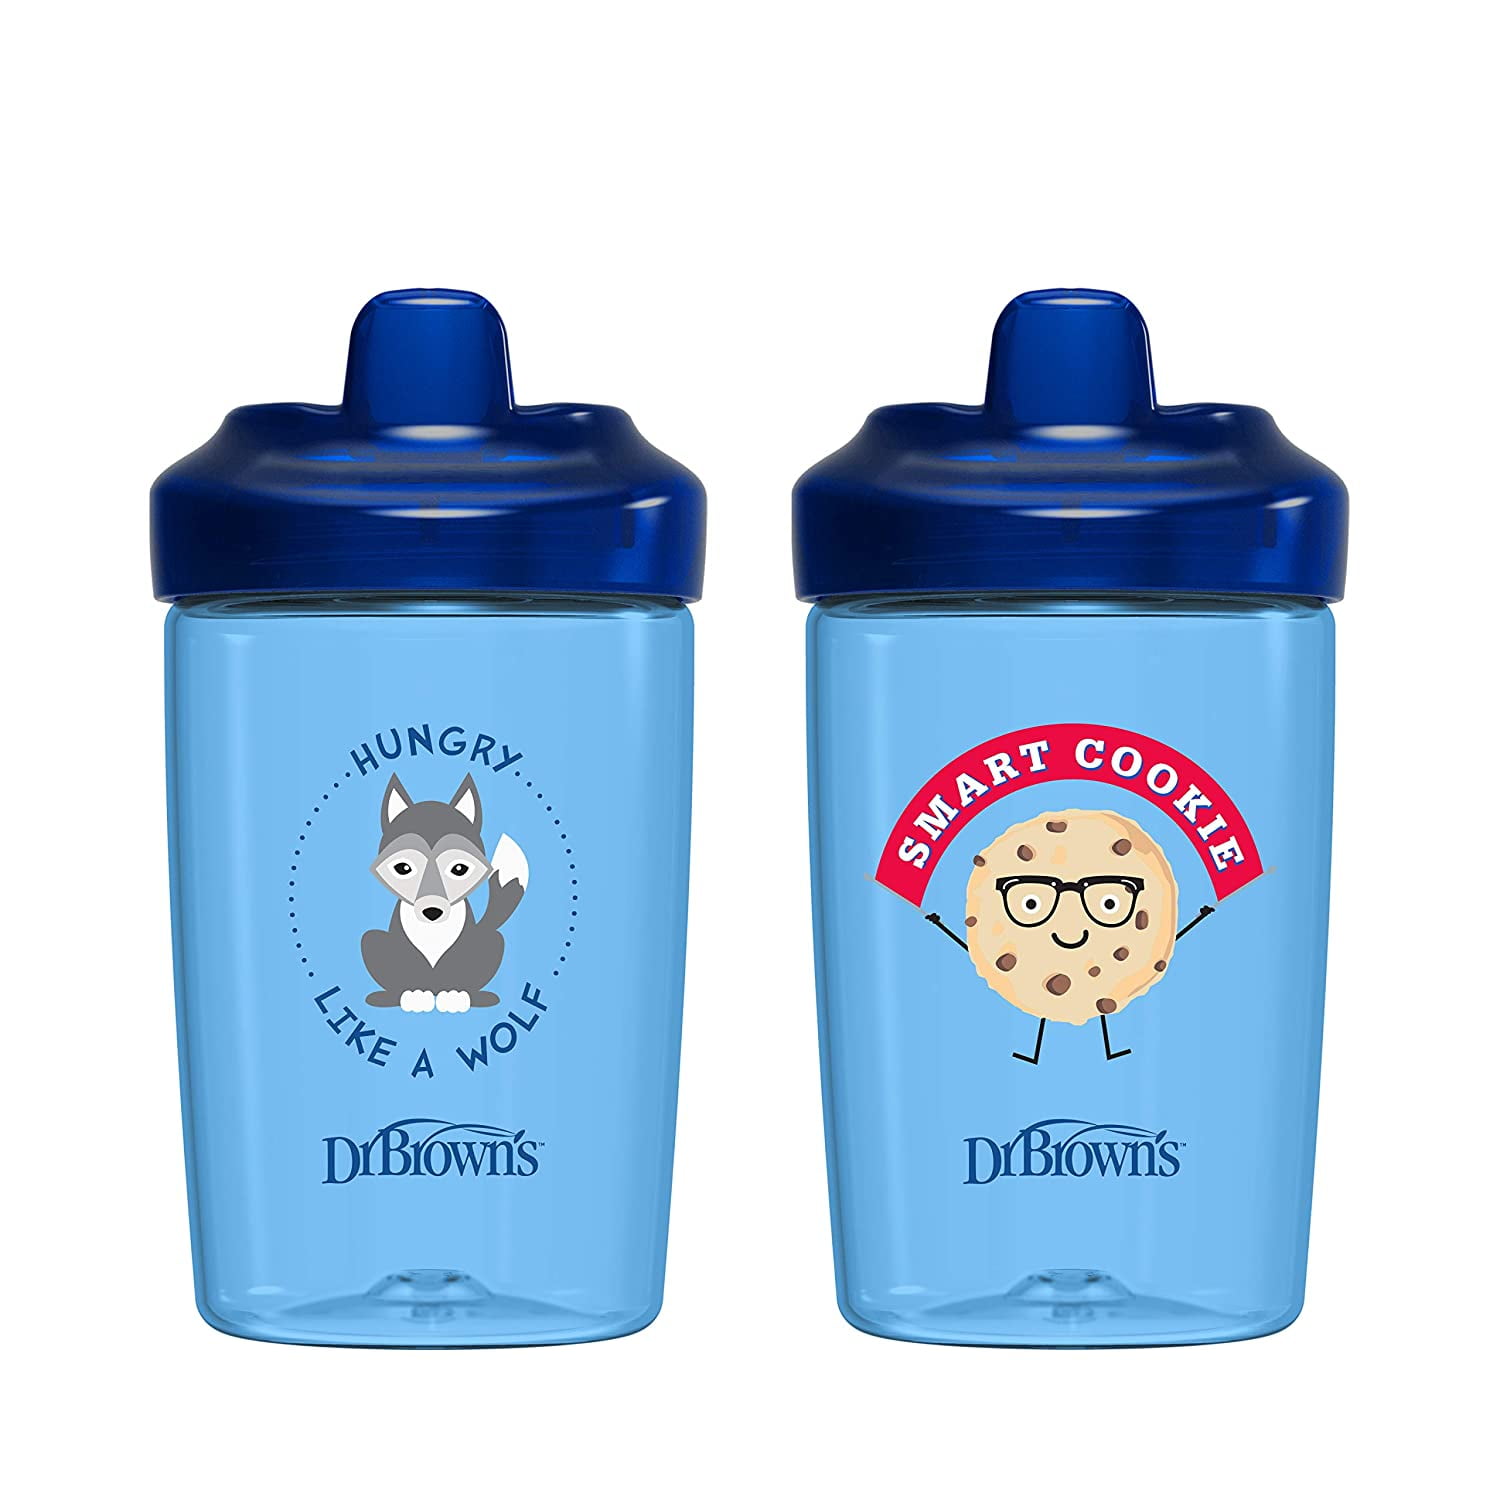 12 oz sippy cup – C6 and Company